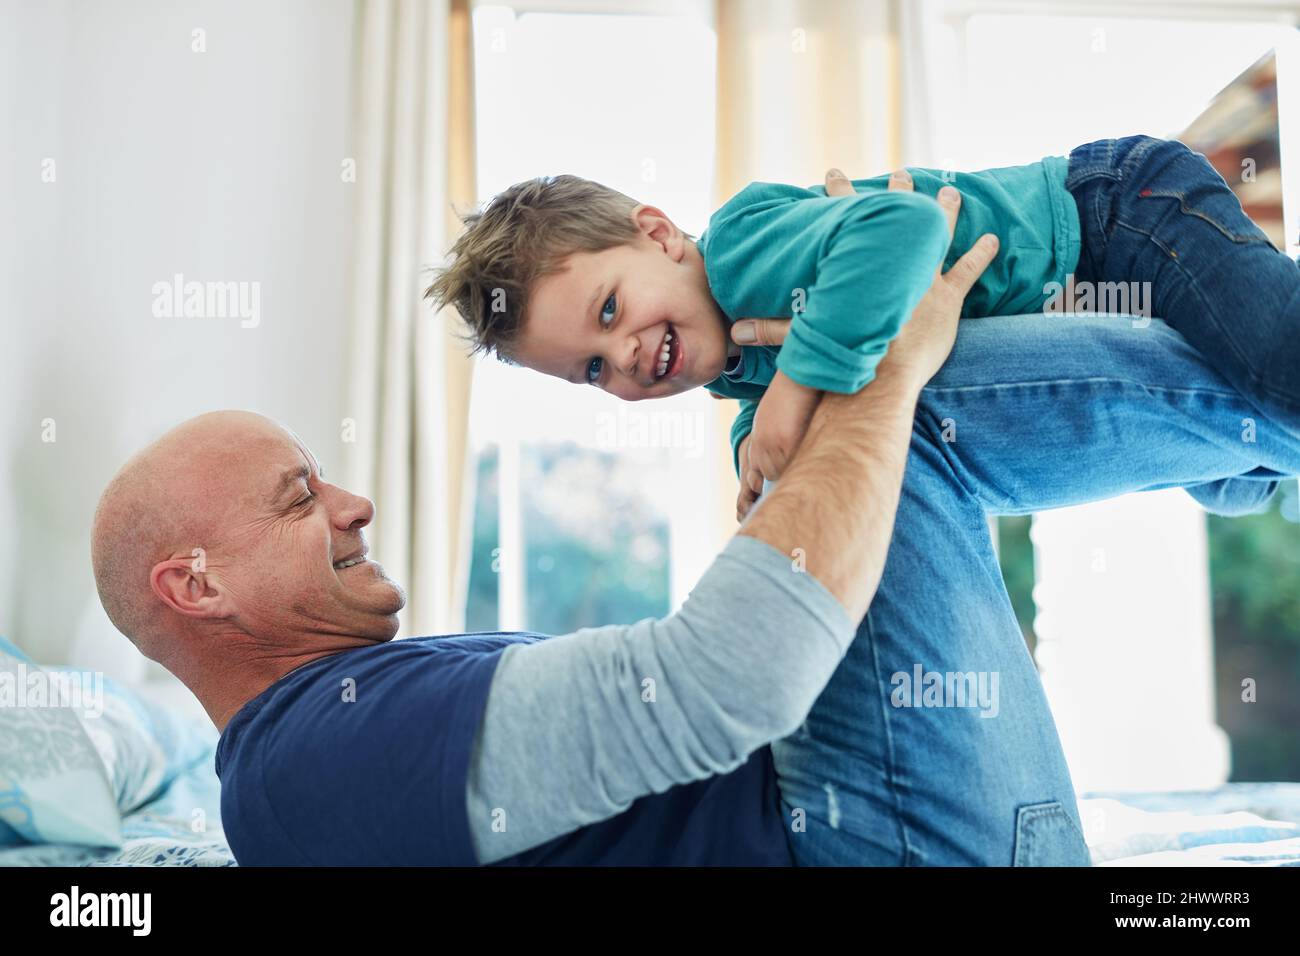 Bonding with his boy. Cropped shot of a father and son bonding together at home. Stock Photo